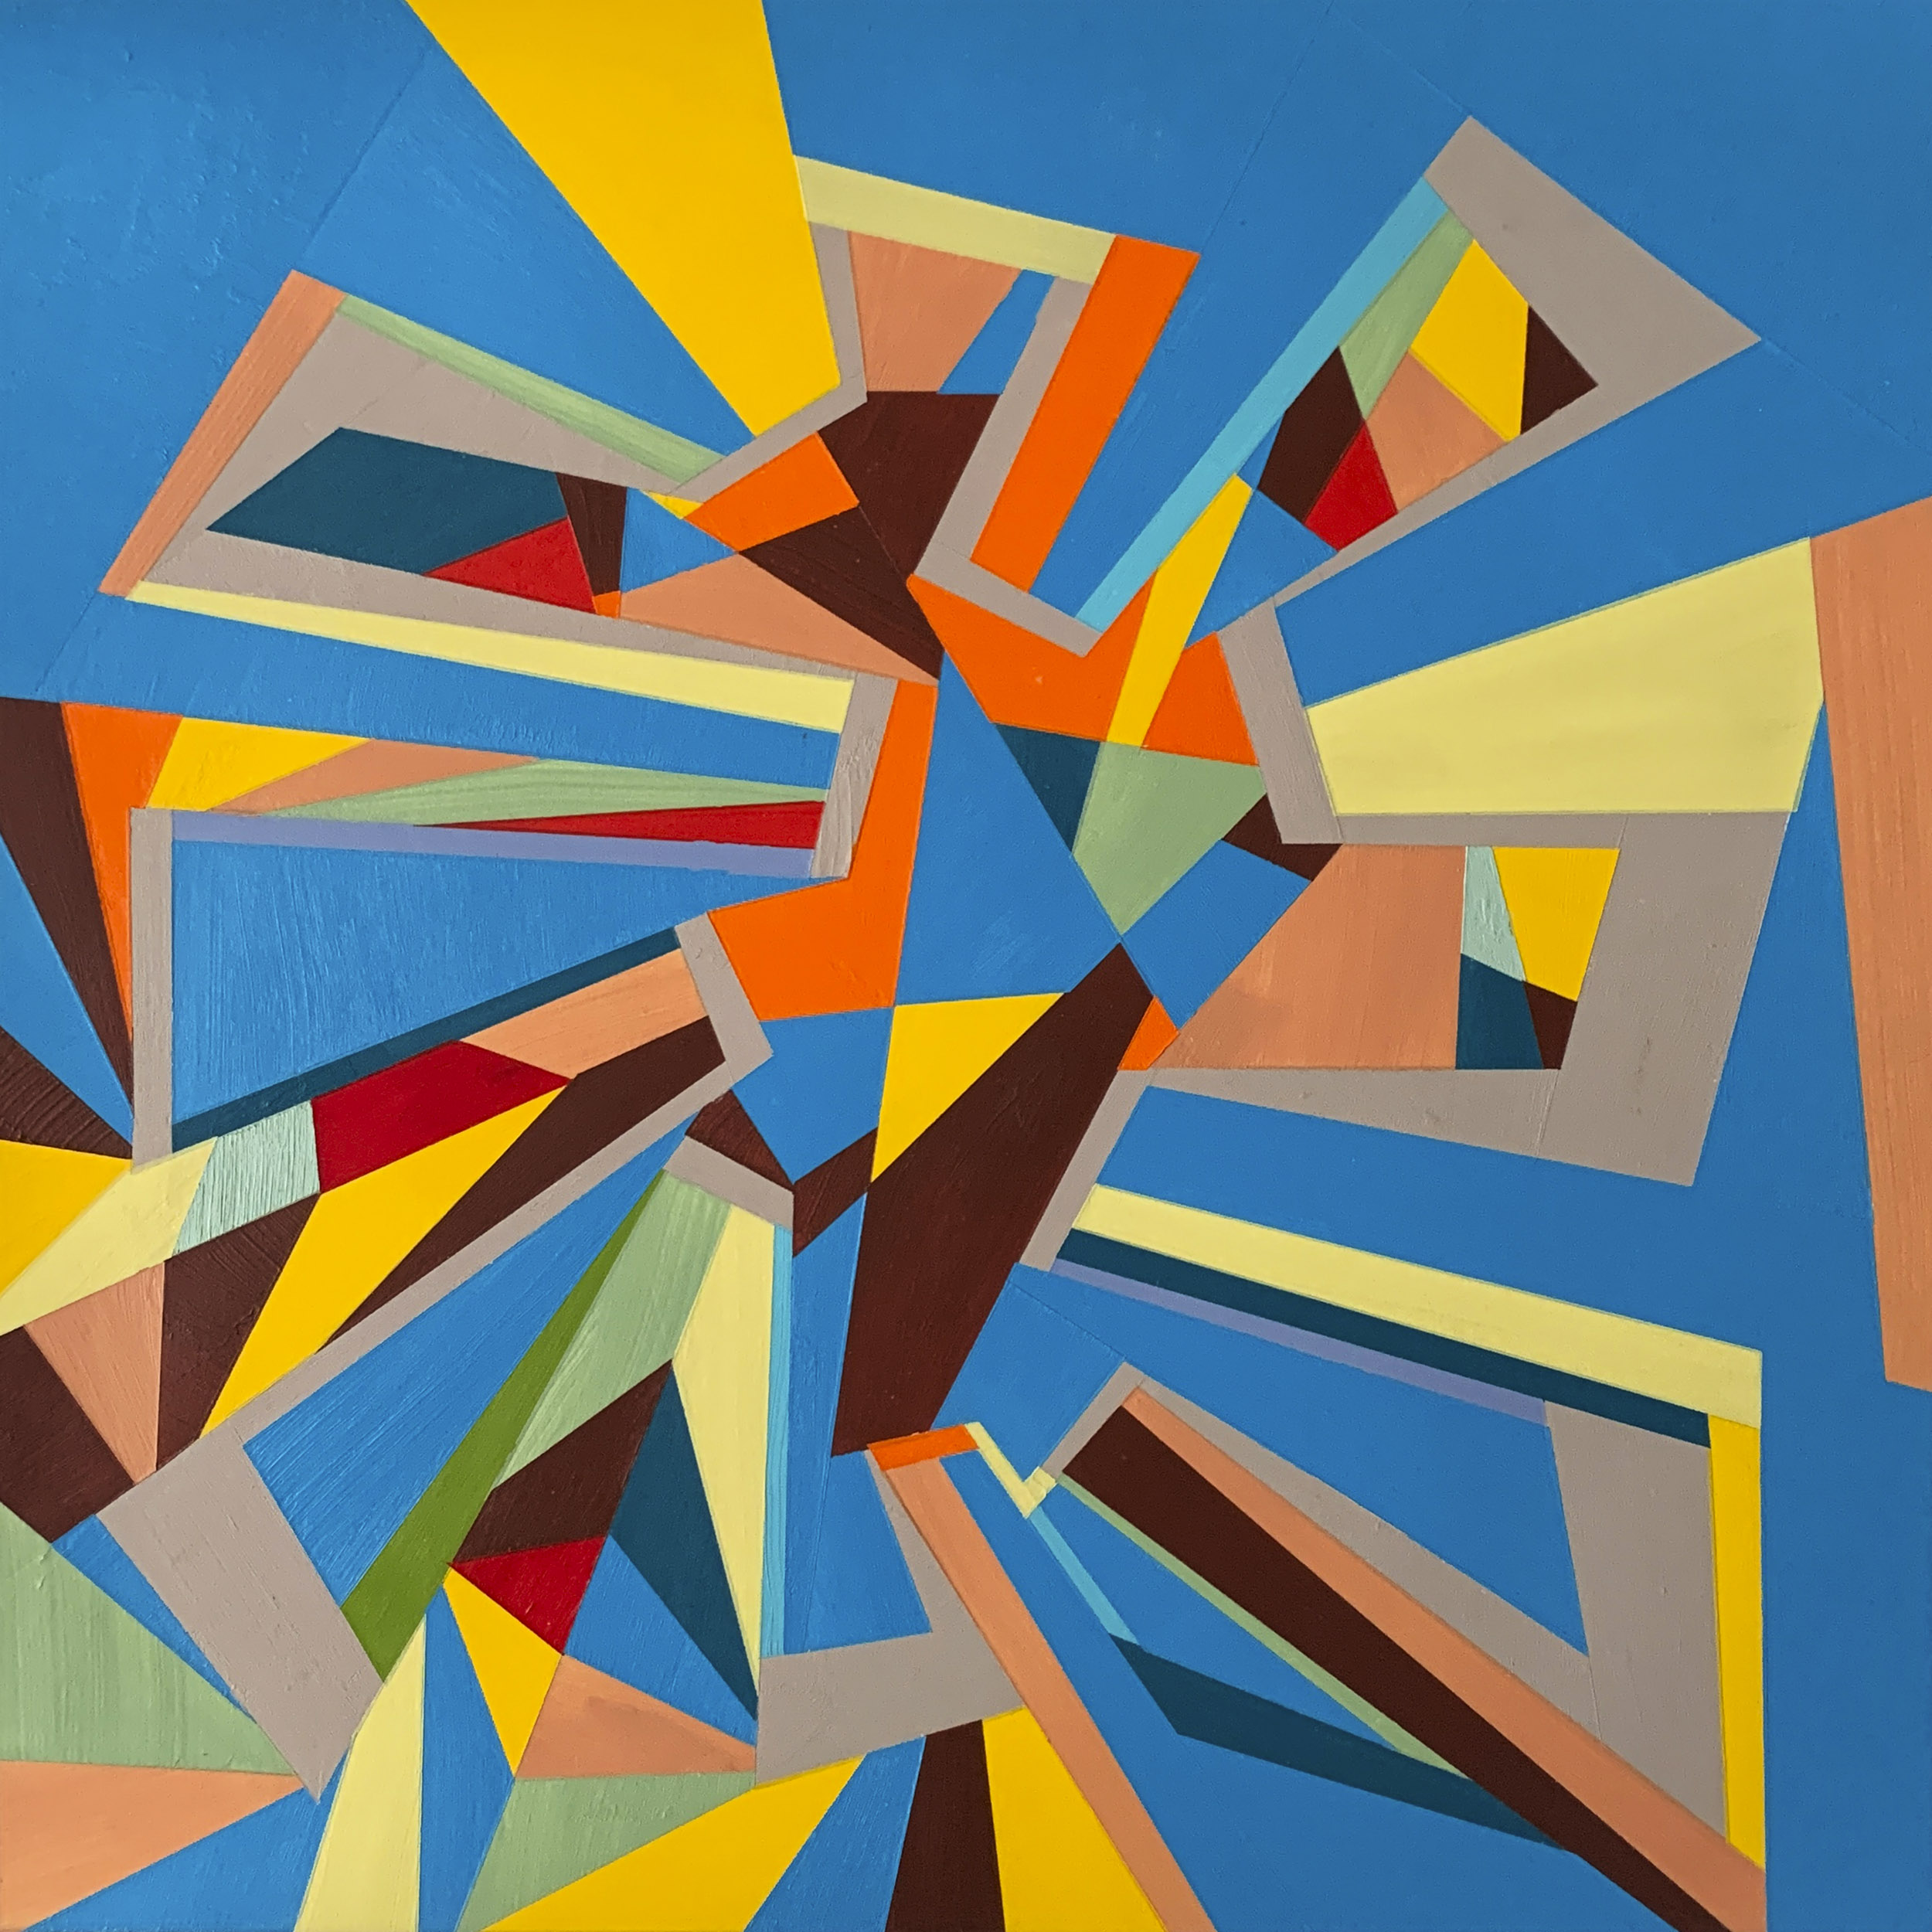 "Painting 1, 4/4/2020" by Mark Feeney. Shapes and bright colors on blue background..